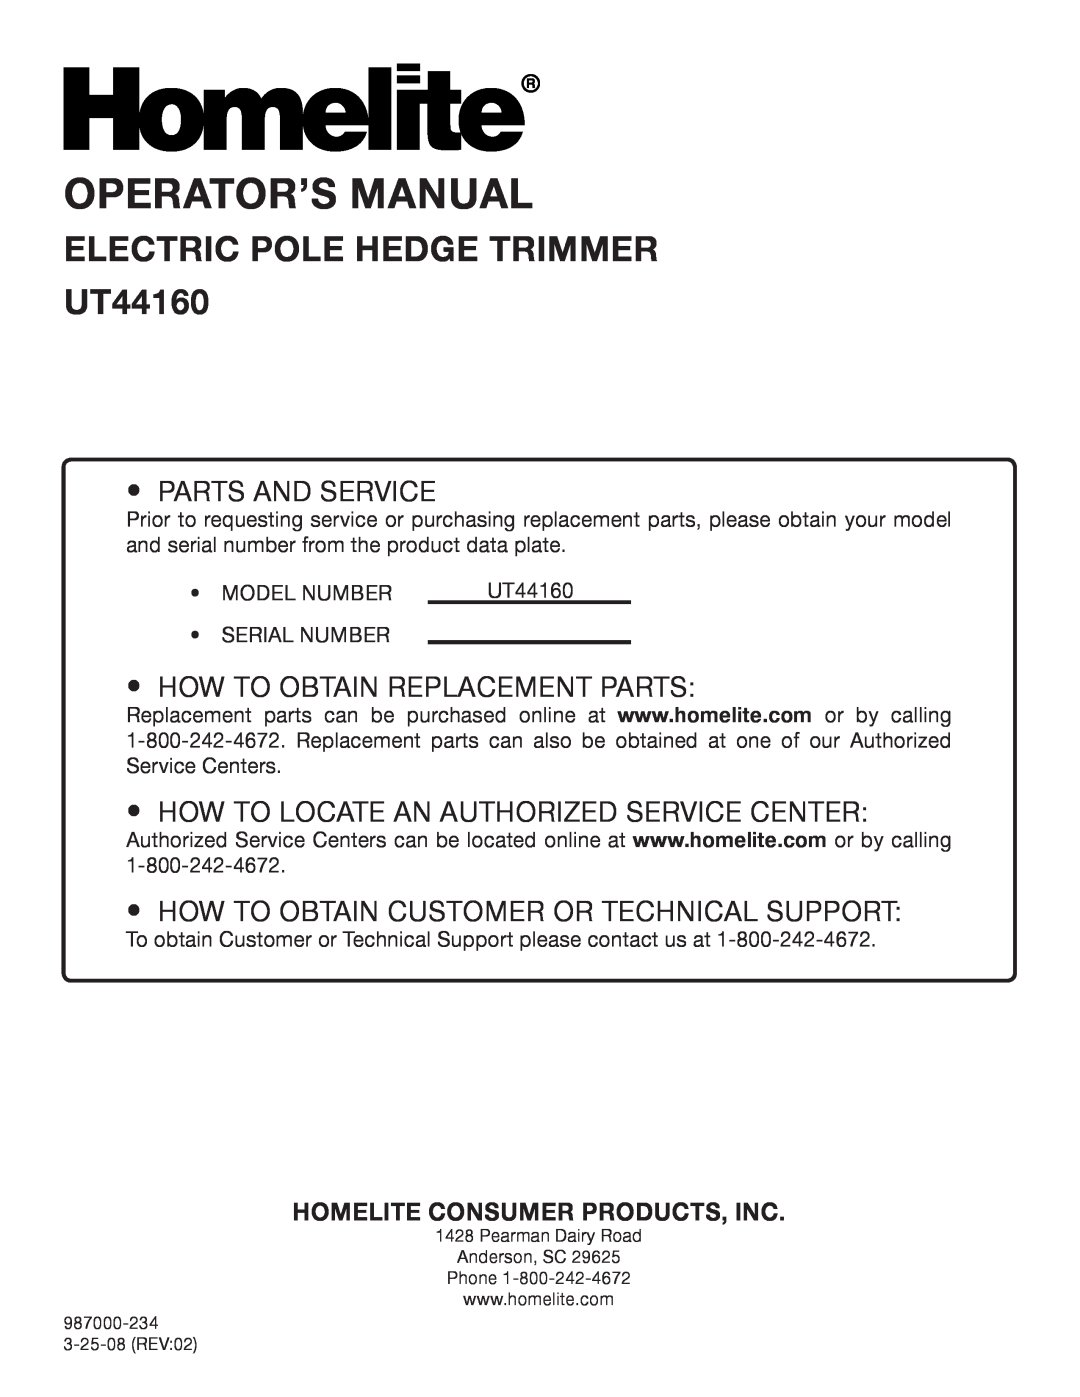 Homelite Operator’S Manual, electric pole hedge trimmer UT44160, Parts and Service, How to obtain Replacement Parts 